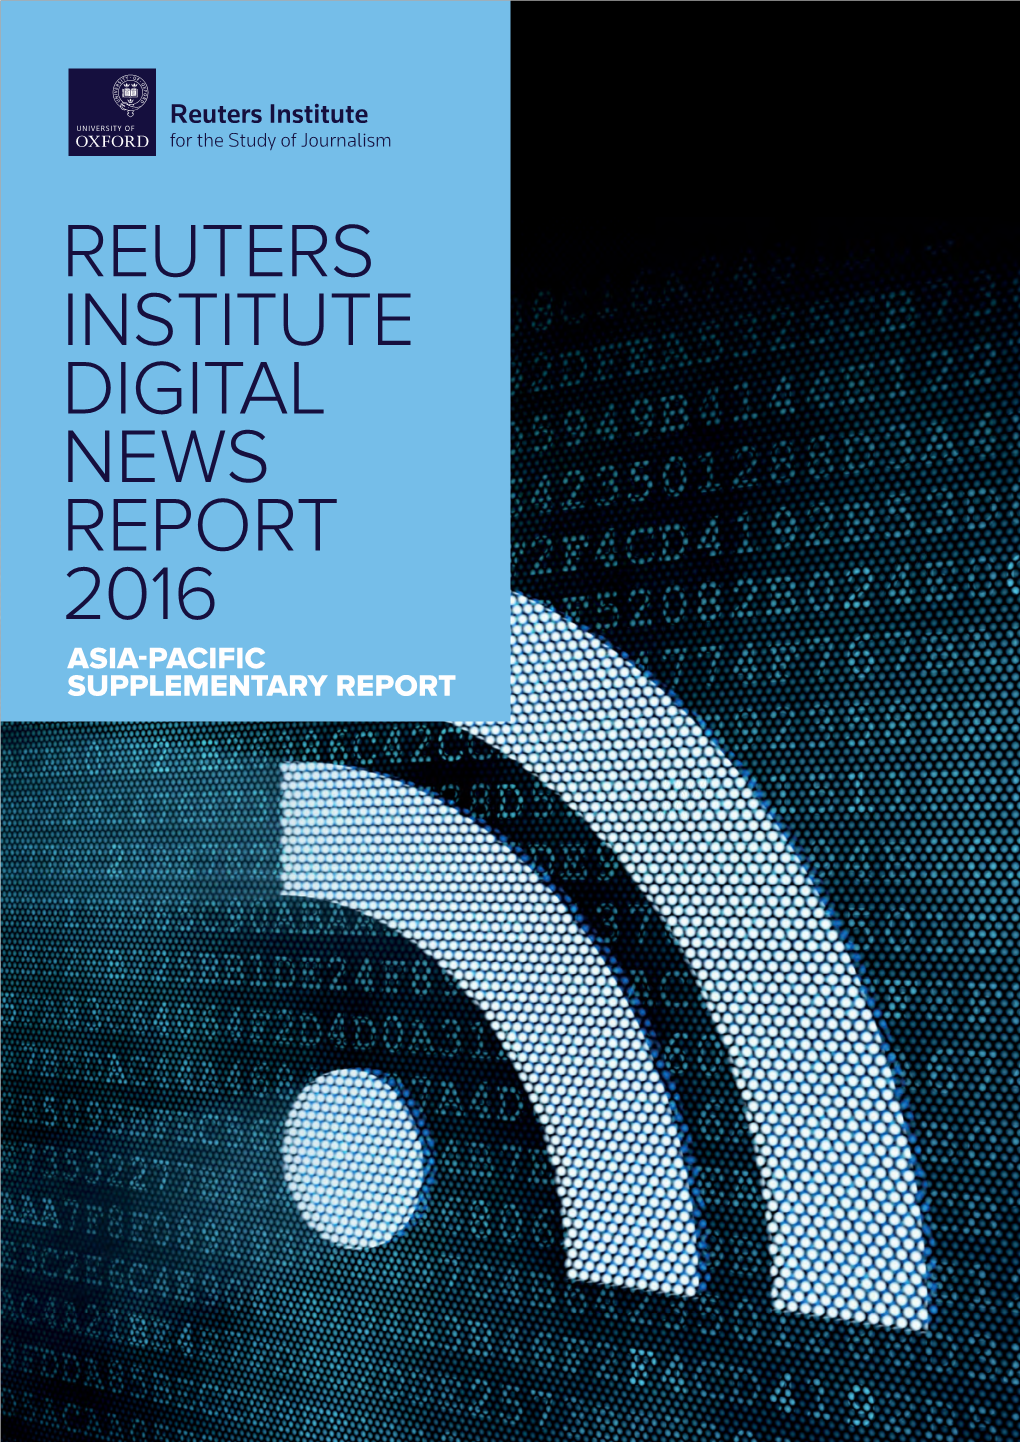 Reuters Institute Digital News Report 2016: Asia-Pacific Supplementary